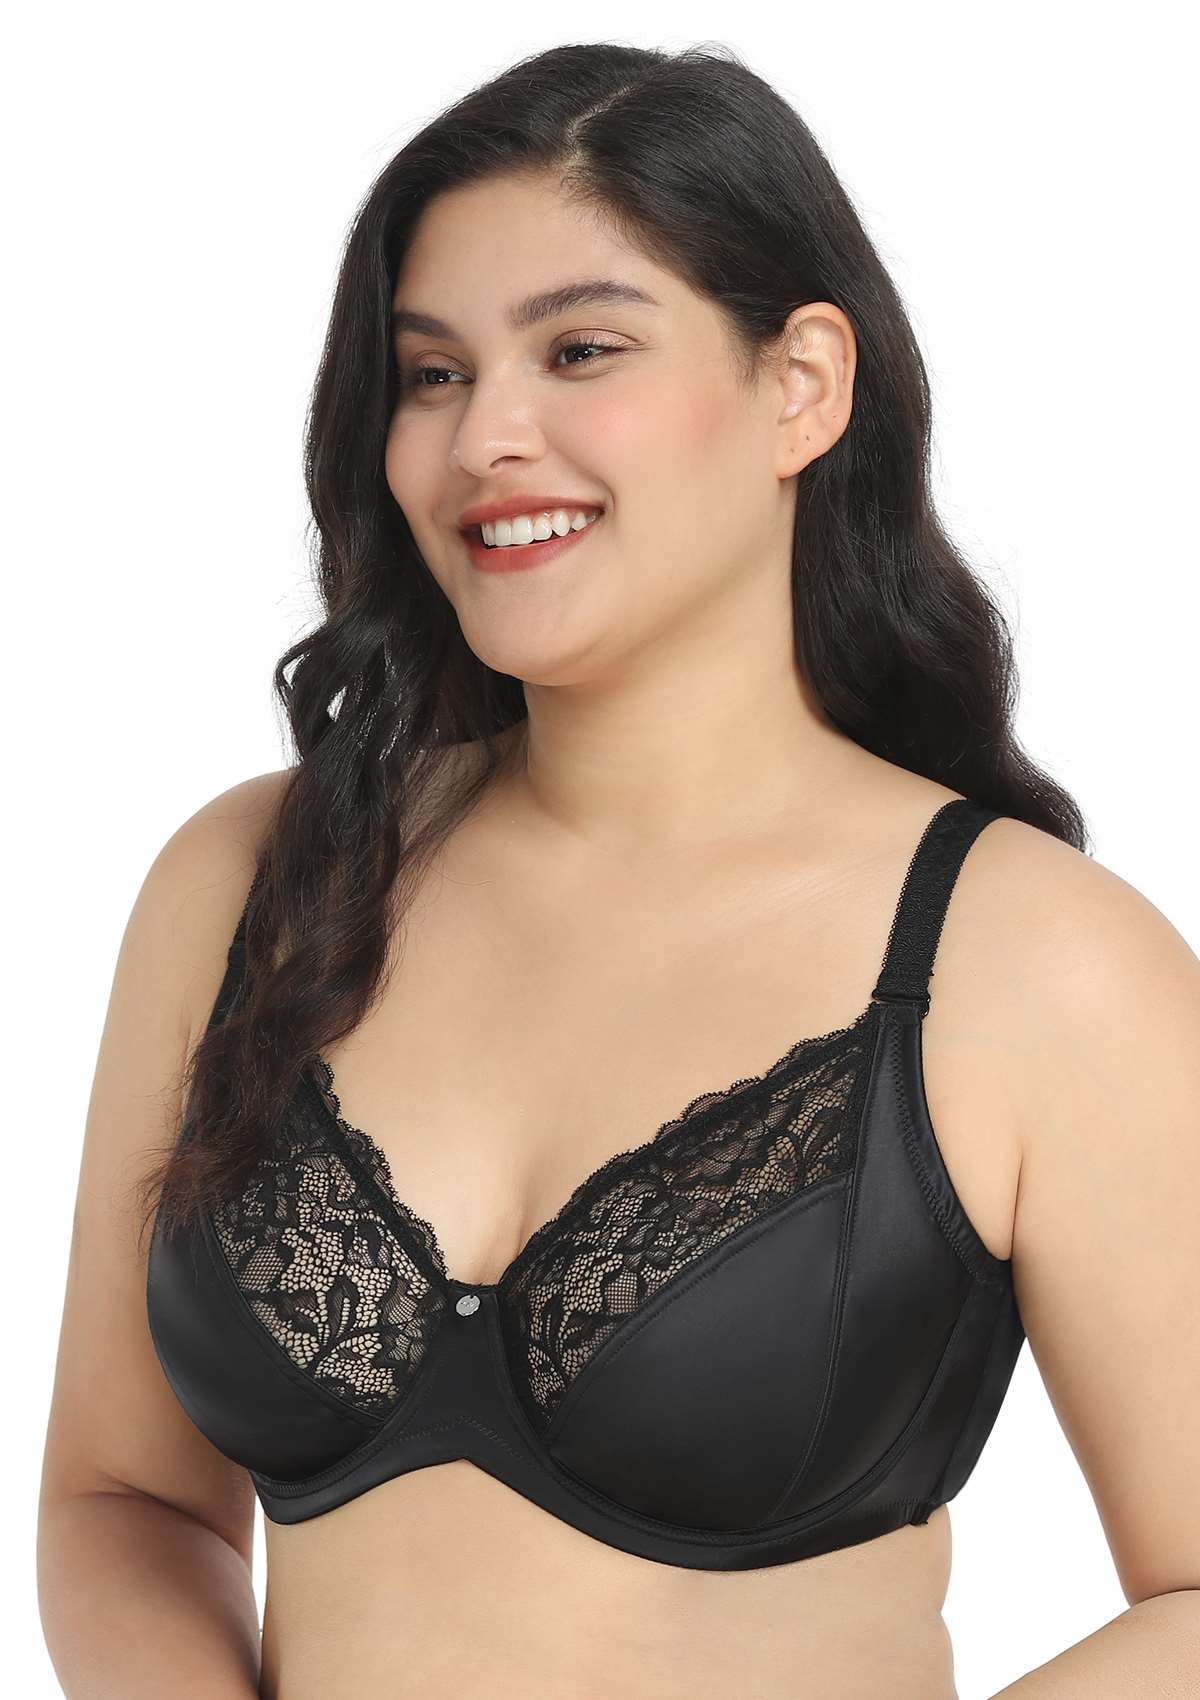 HSIA Foxy Satin Silky Full Coverage Underwire Bra With Floral Lace Trim - Black / 42 / C